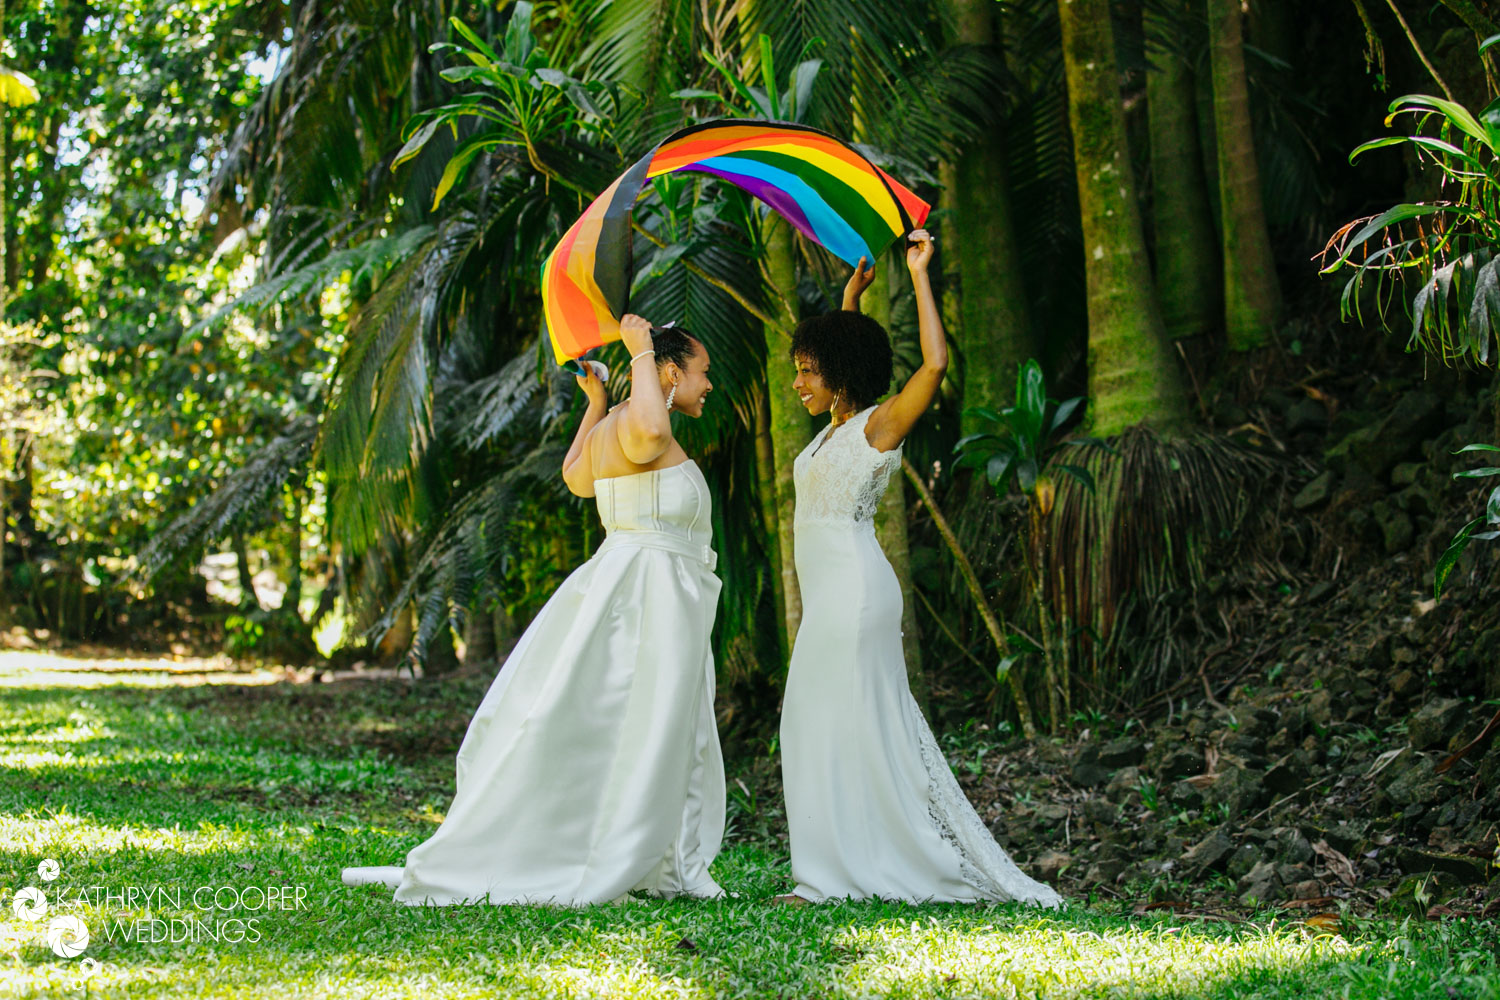 Two brides with rainbow flag